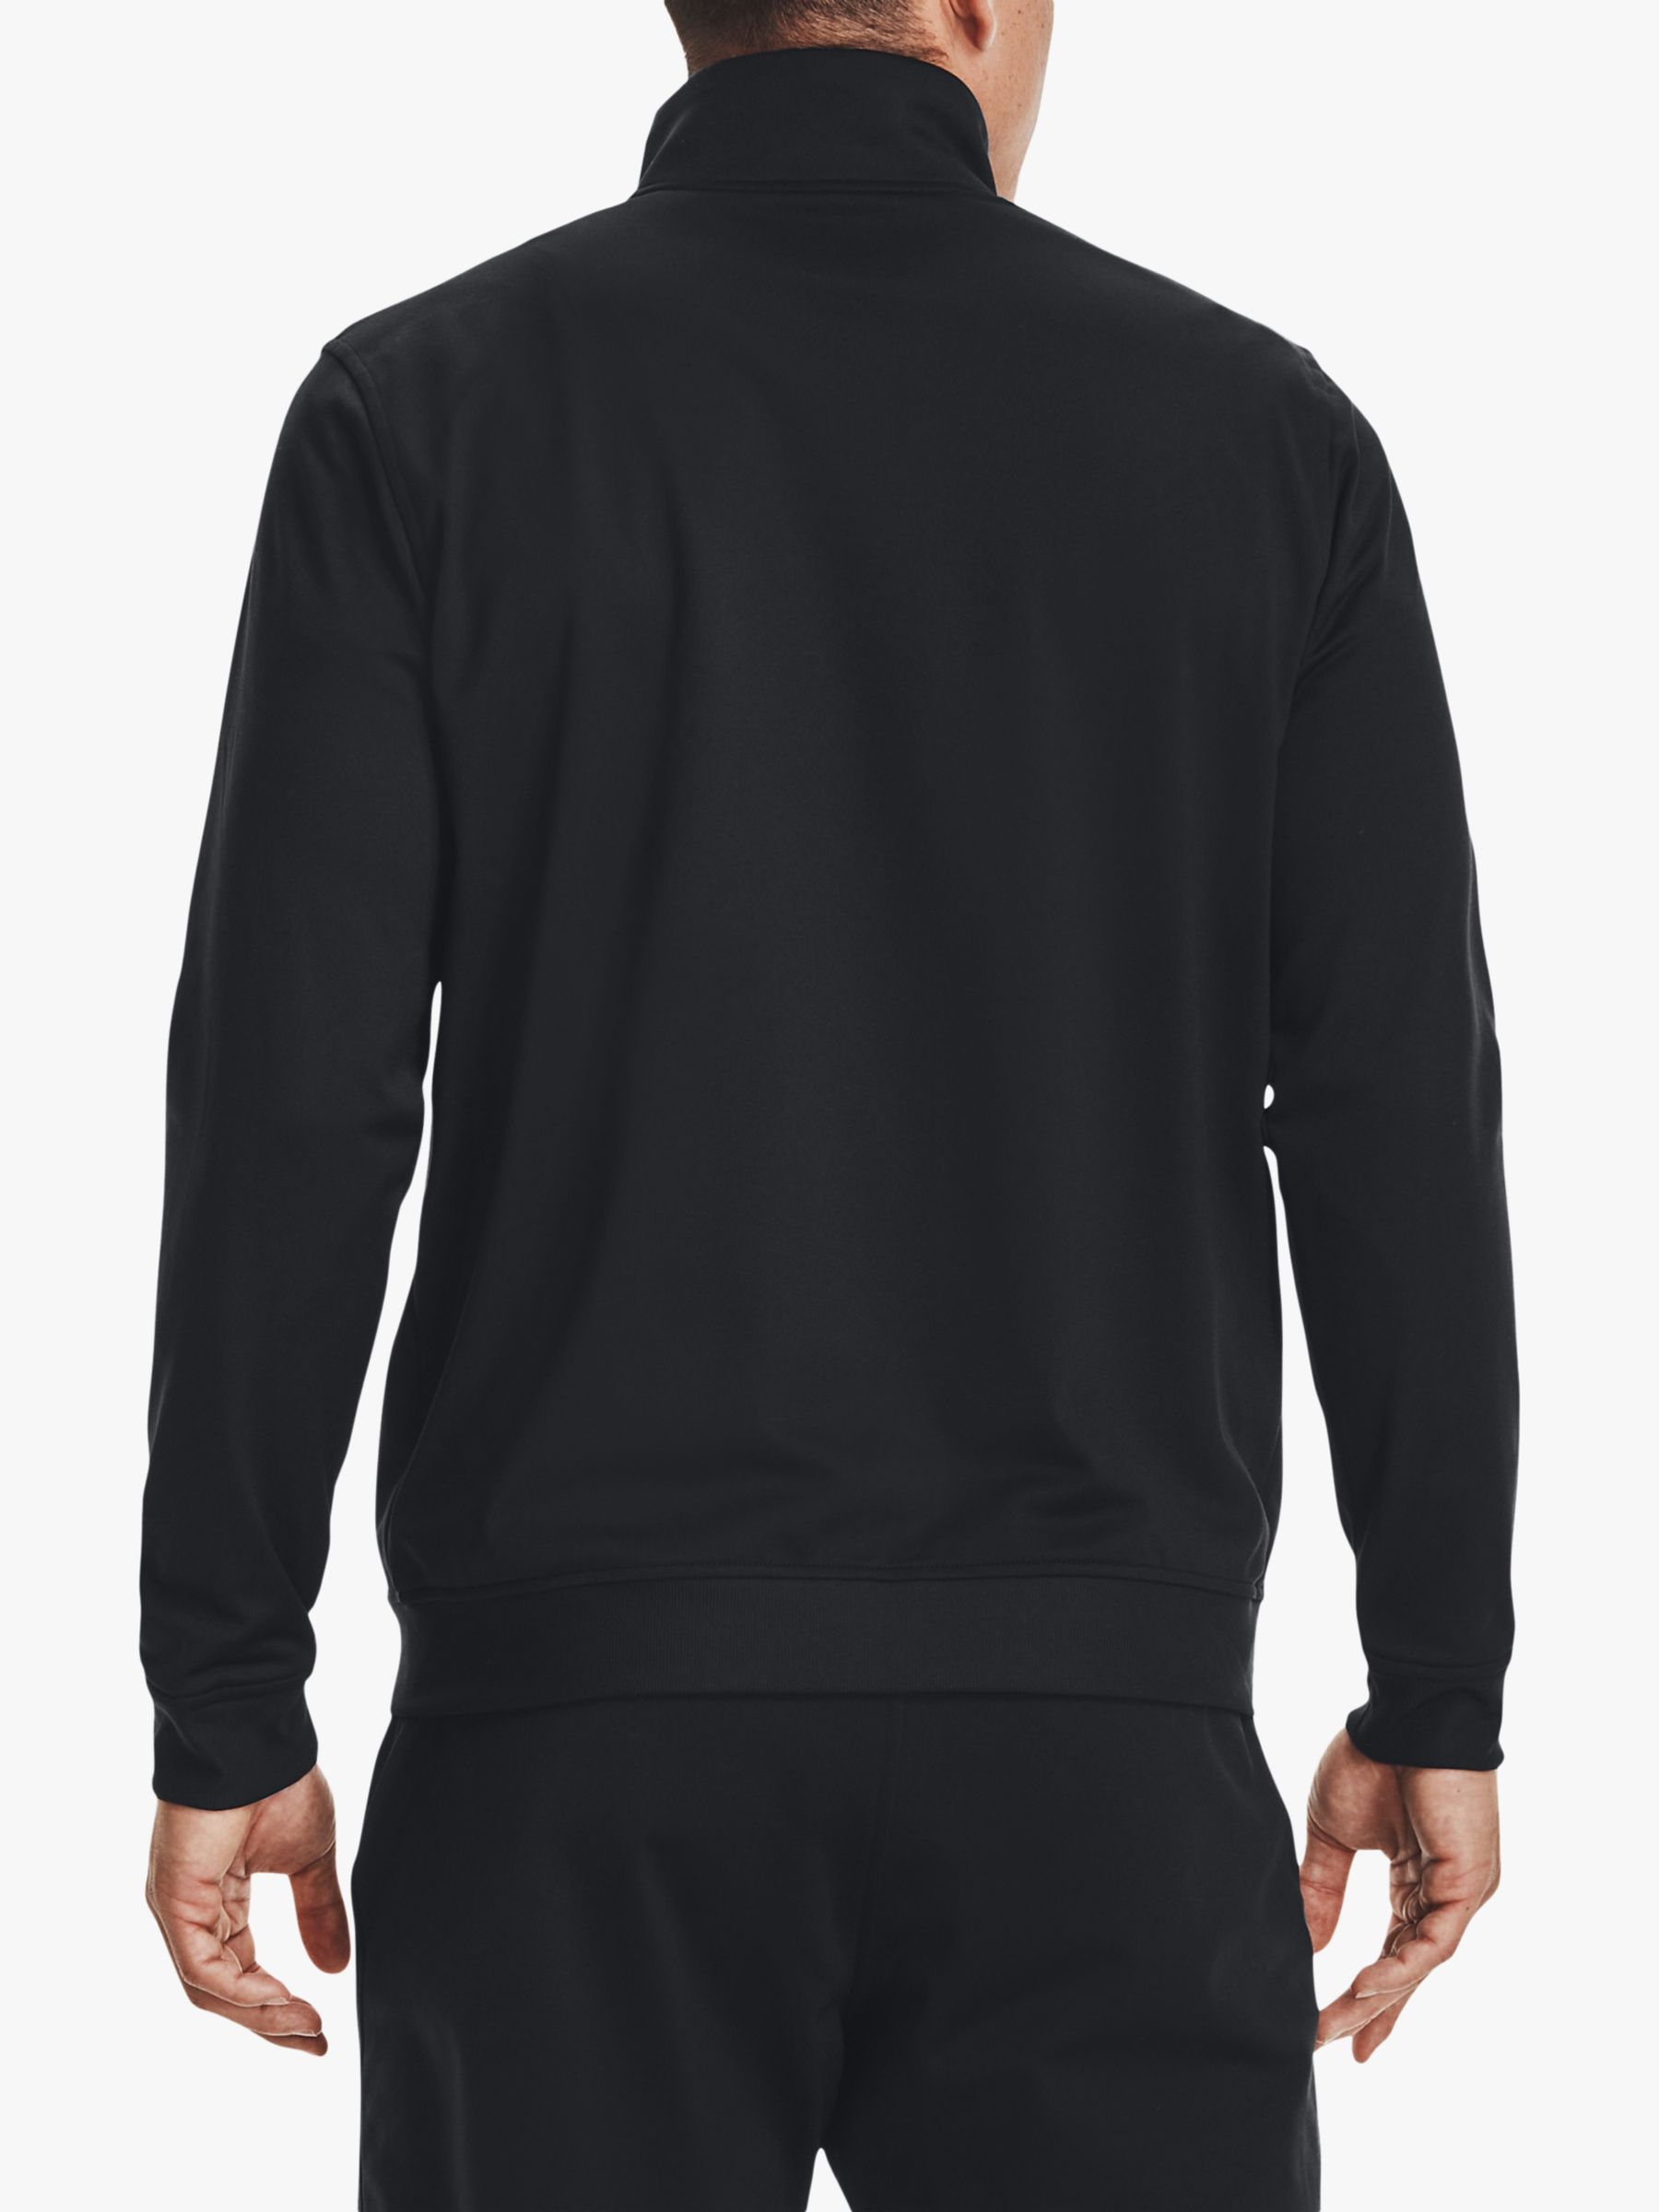 Under Armour Sportstyle Tricot Men's Gym Jacket